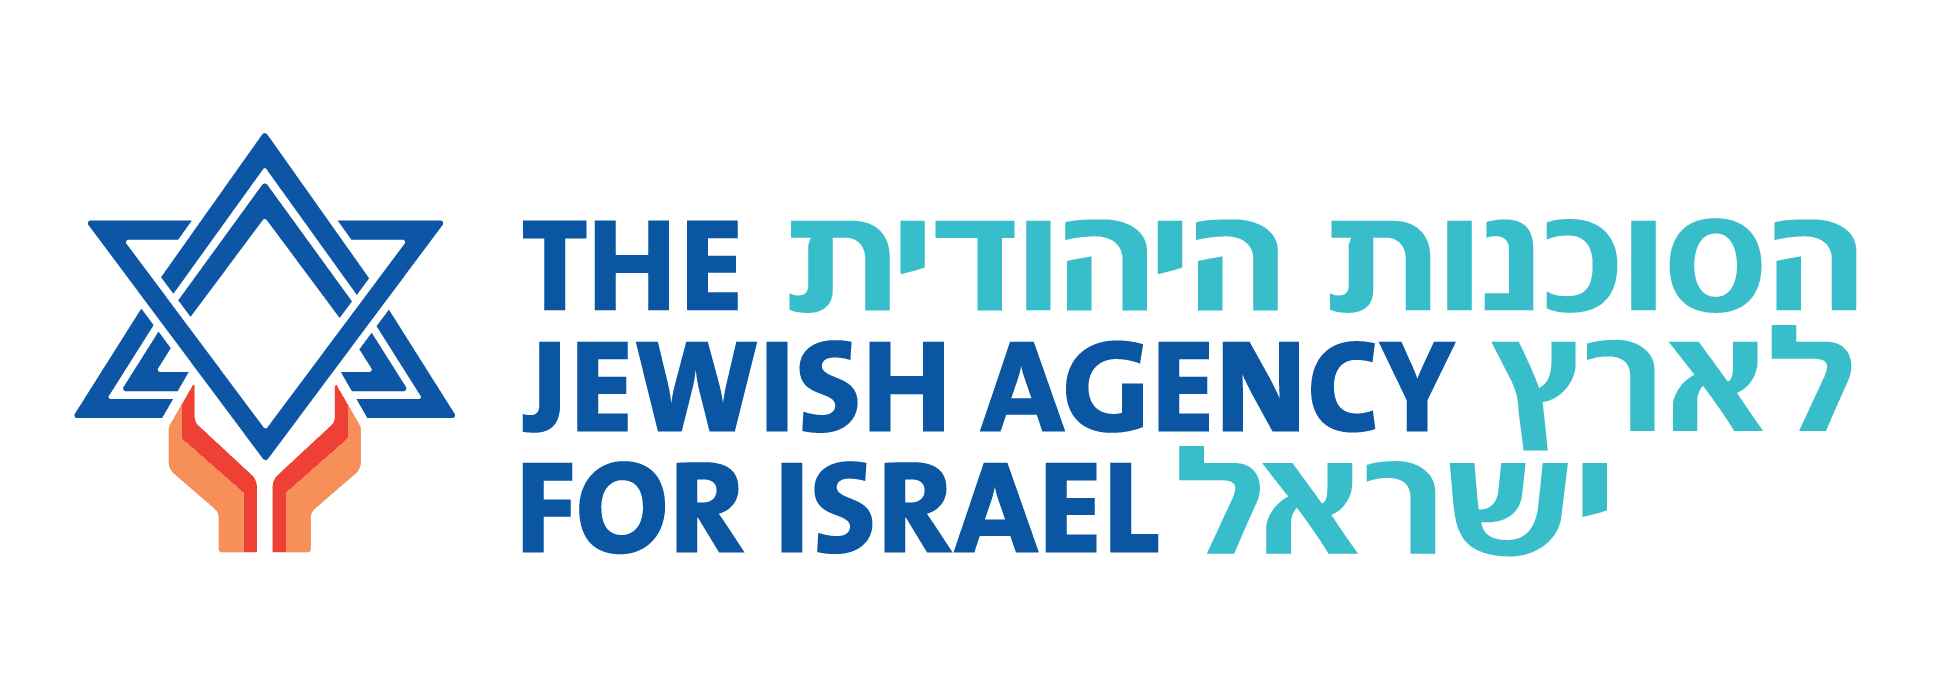 The_Jewish_Agency.png